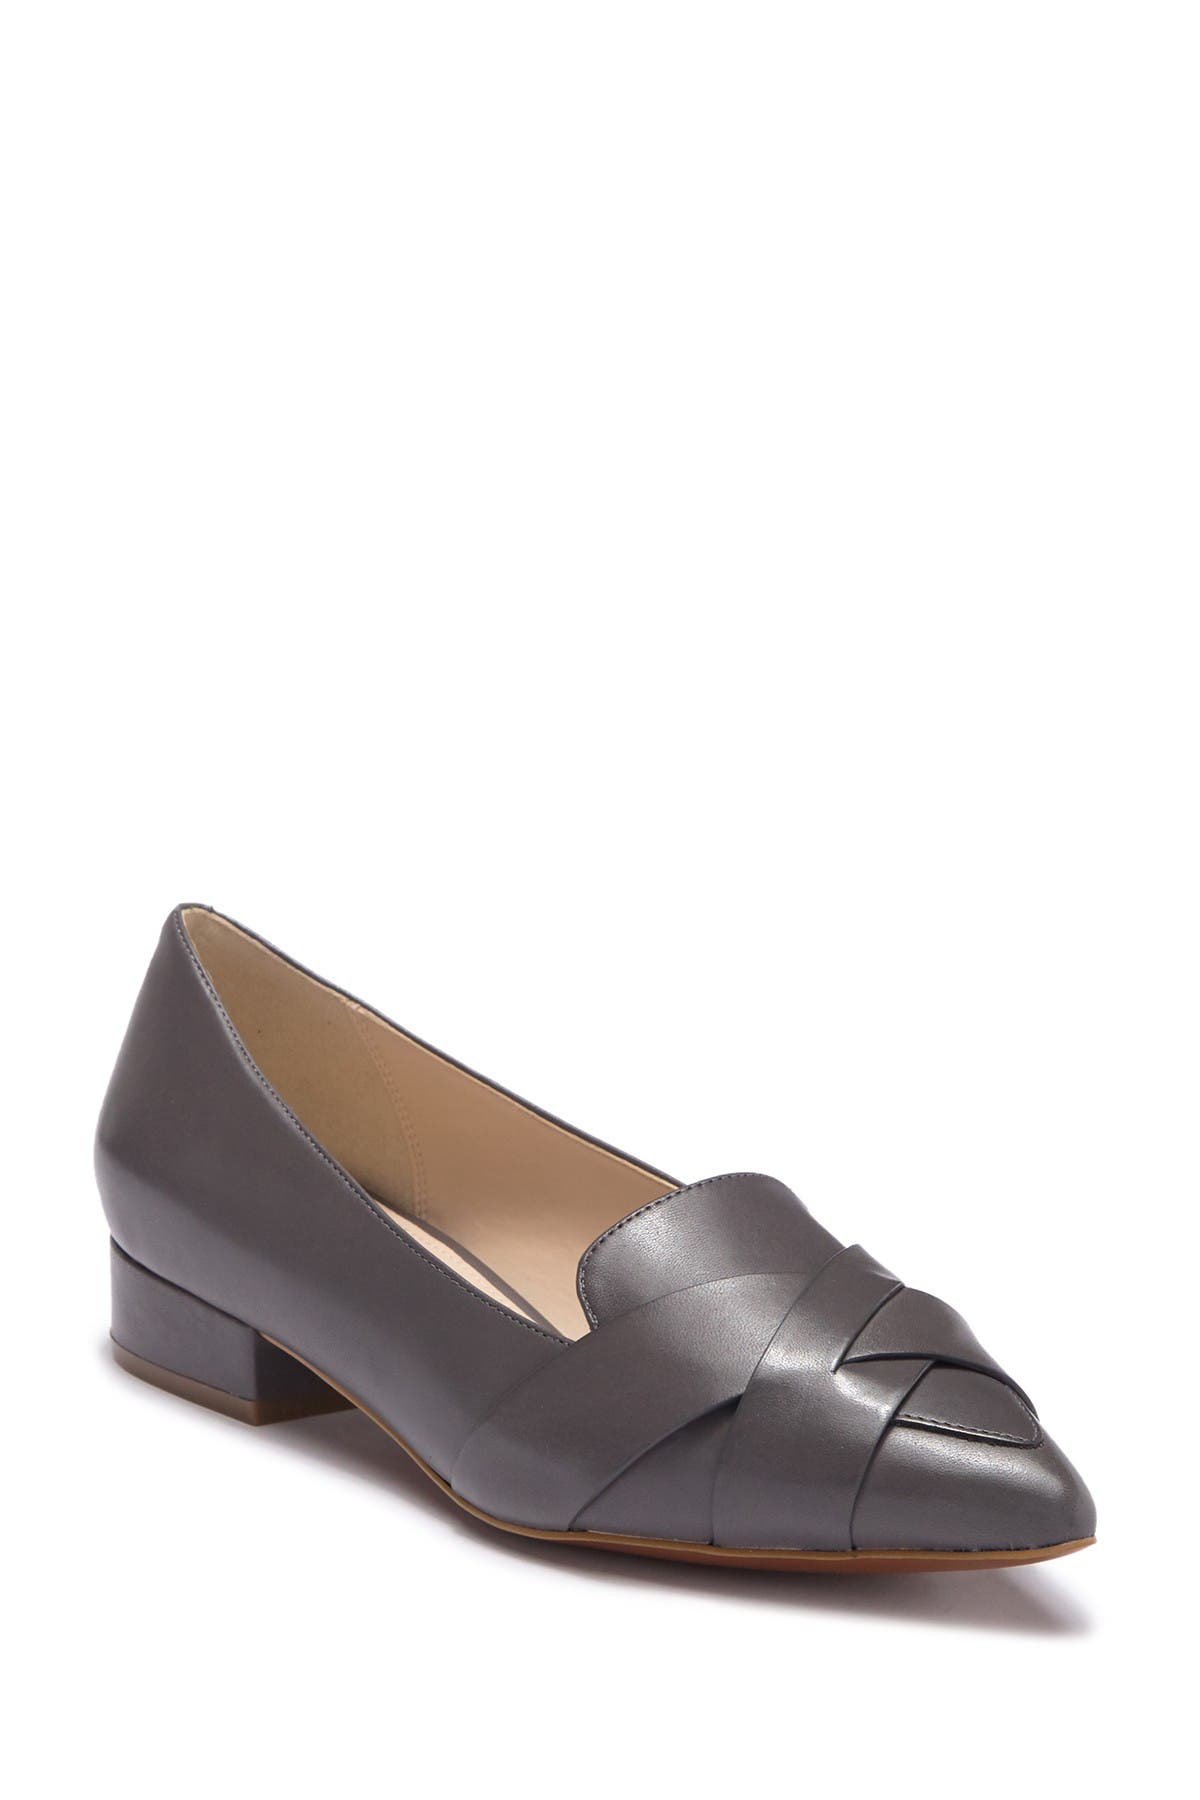 Cole Haan | Camila Leather Skimmer Flat 